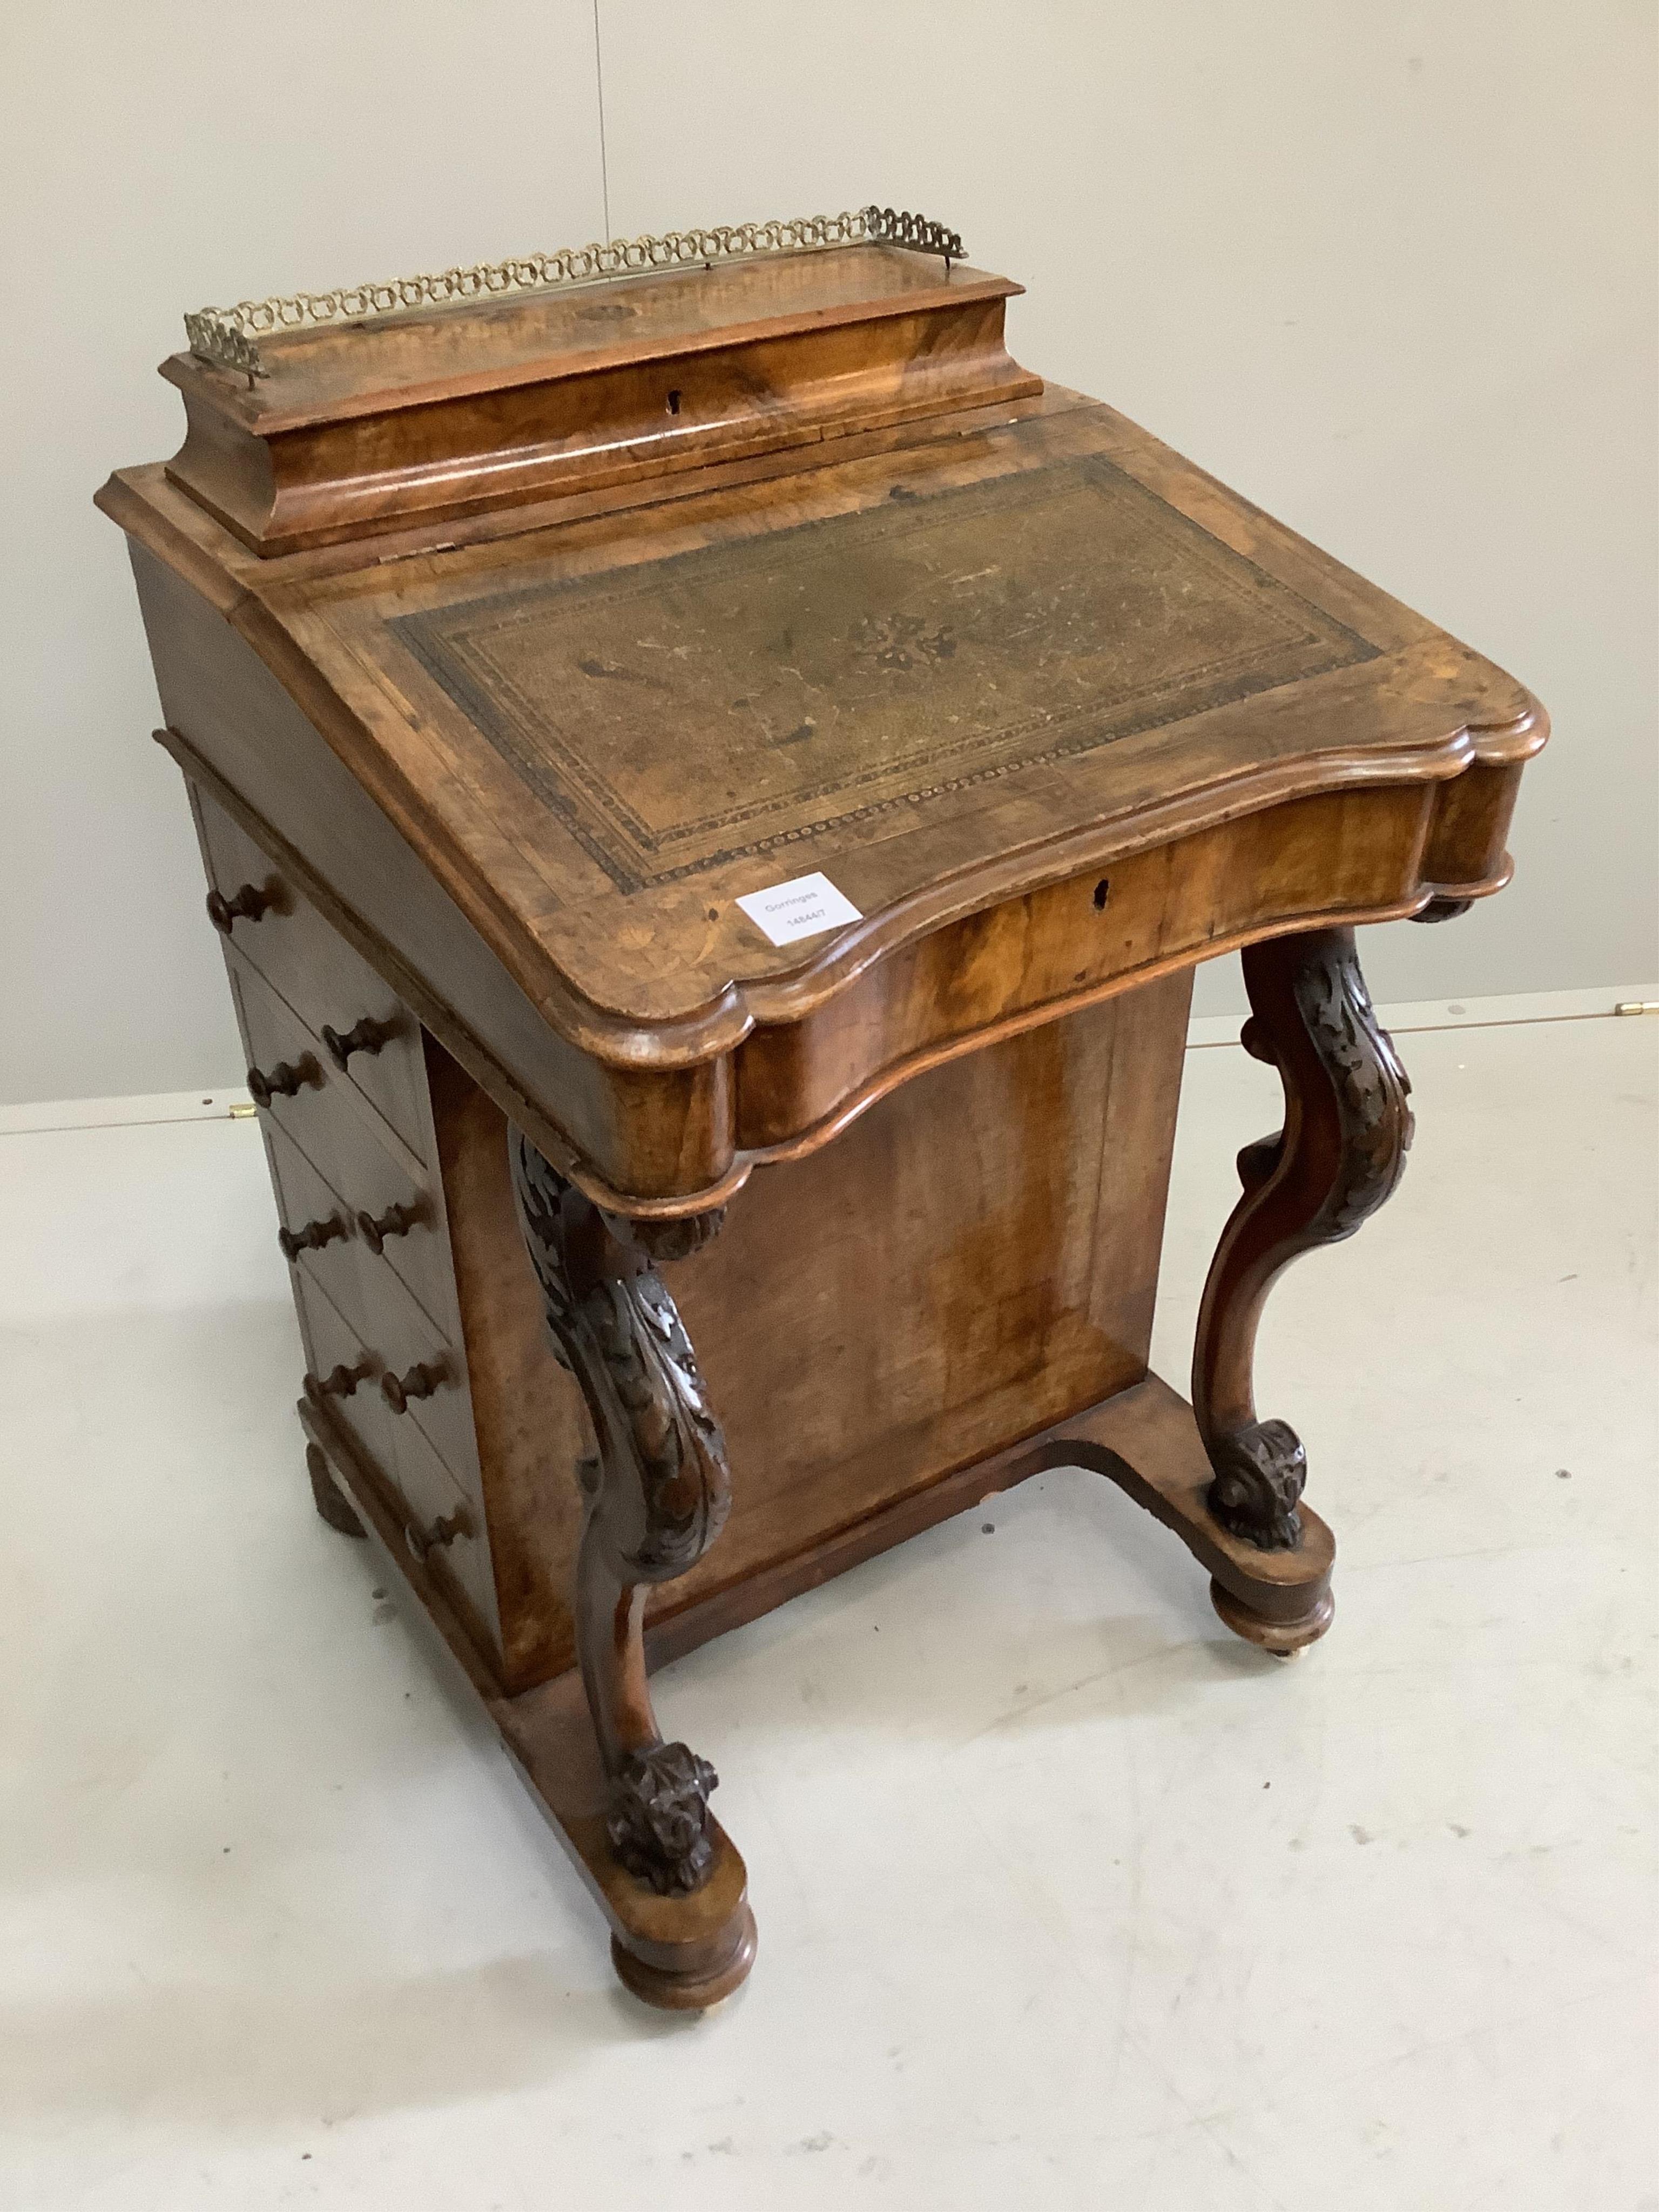 A Victorian walnut and marquetry inlaid Davenport, width 53cm, depth 53cm, height 82cm. Condition - fair